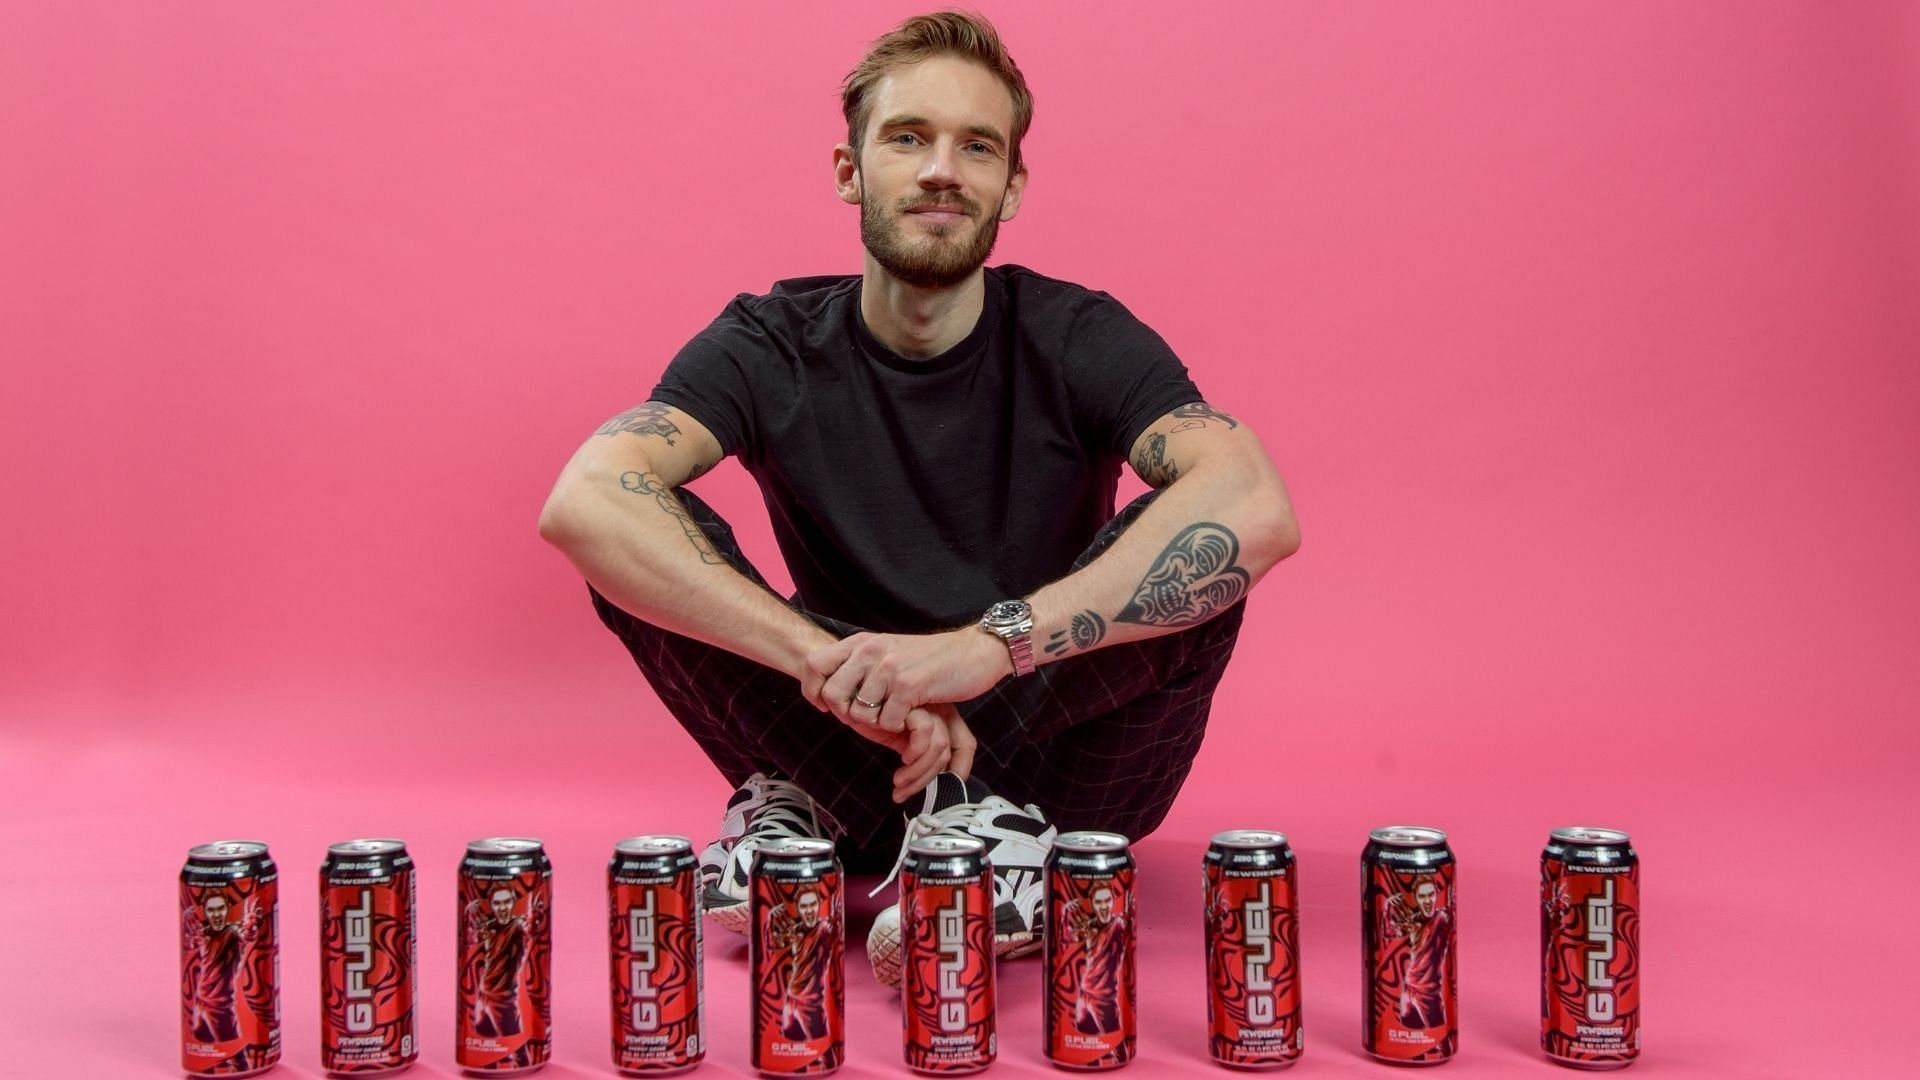 Felix with his G FUEL products (Image via G FUEL)